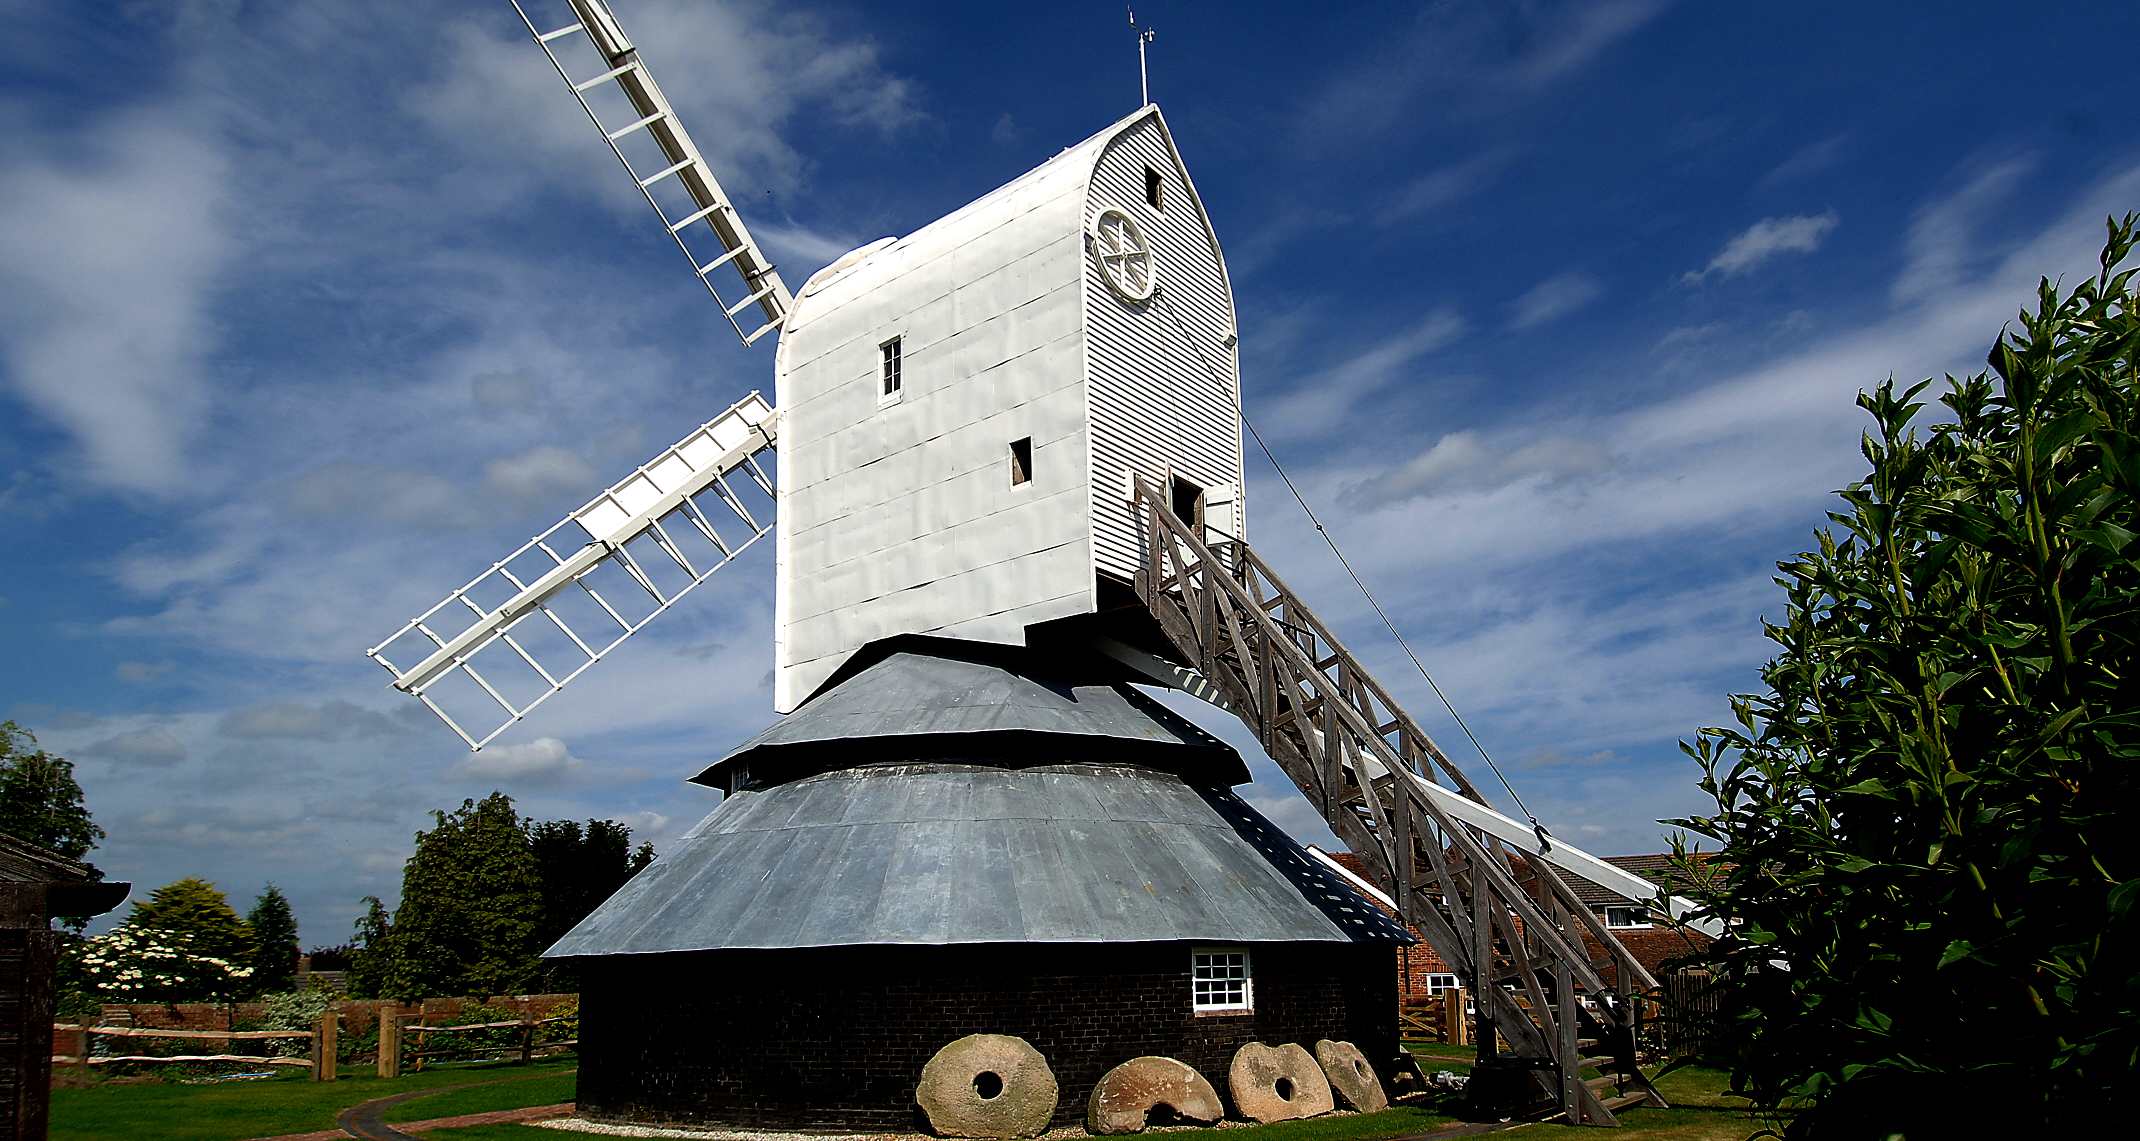 The tallest post mill in England is at Windmill Hill within the Wealden District